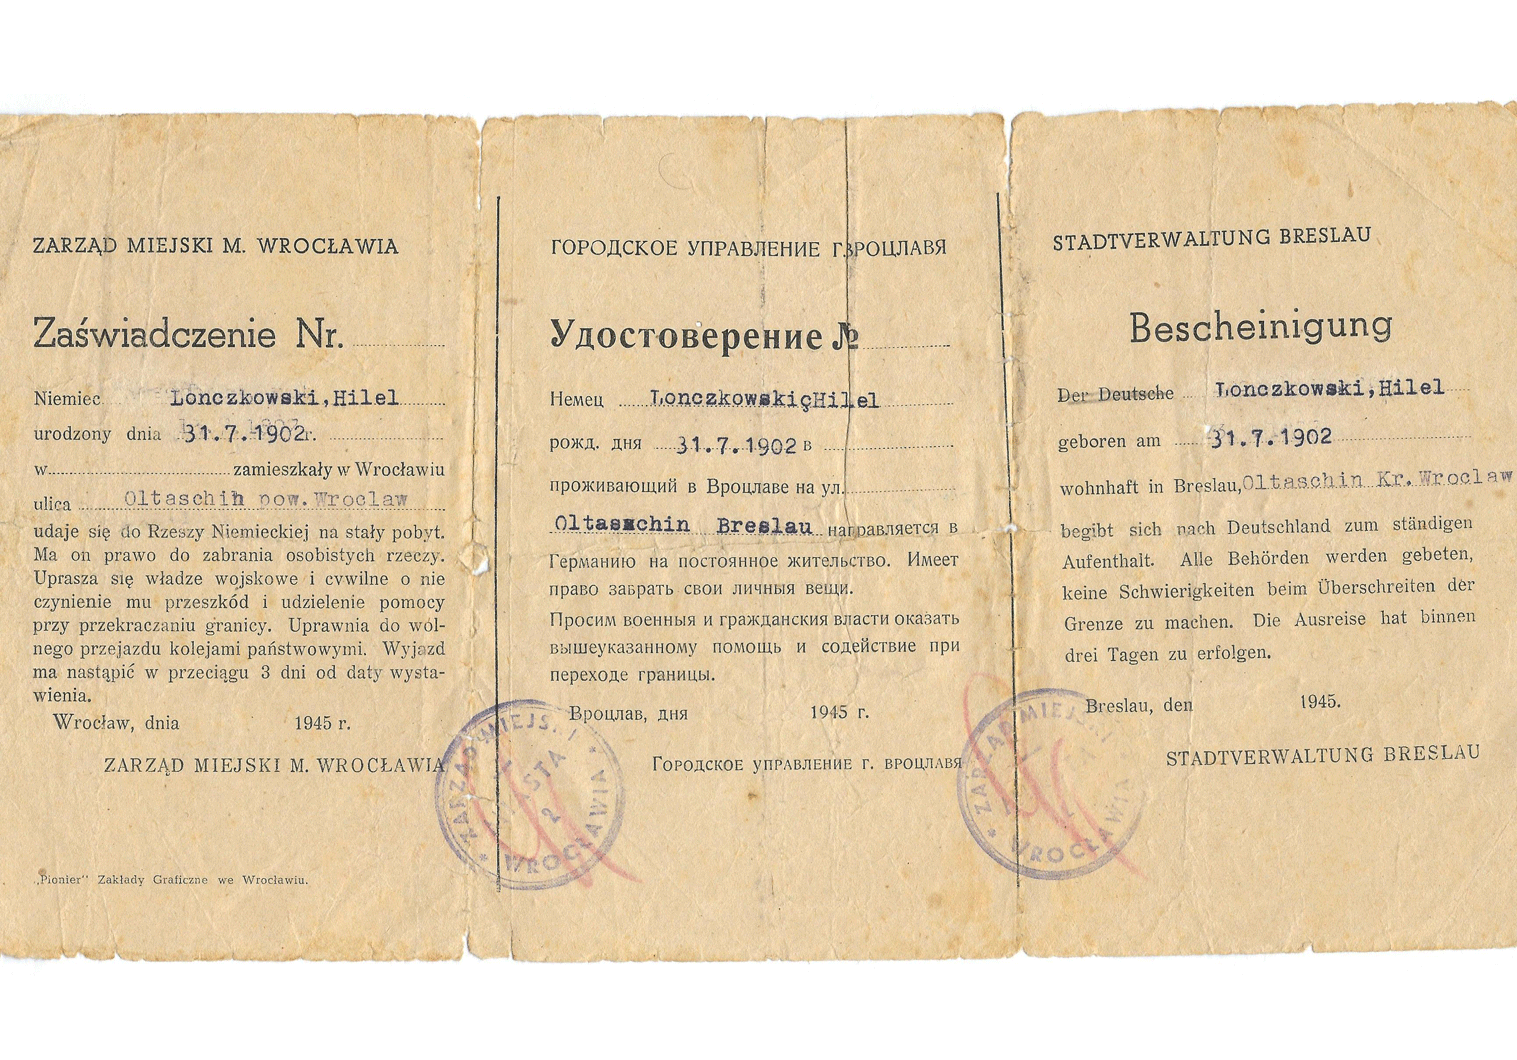 WW2 German evacuation and deportation papers.